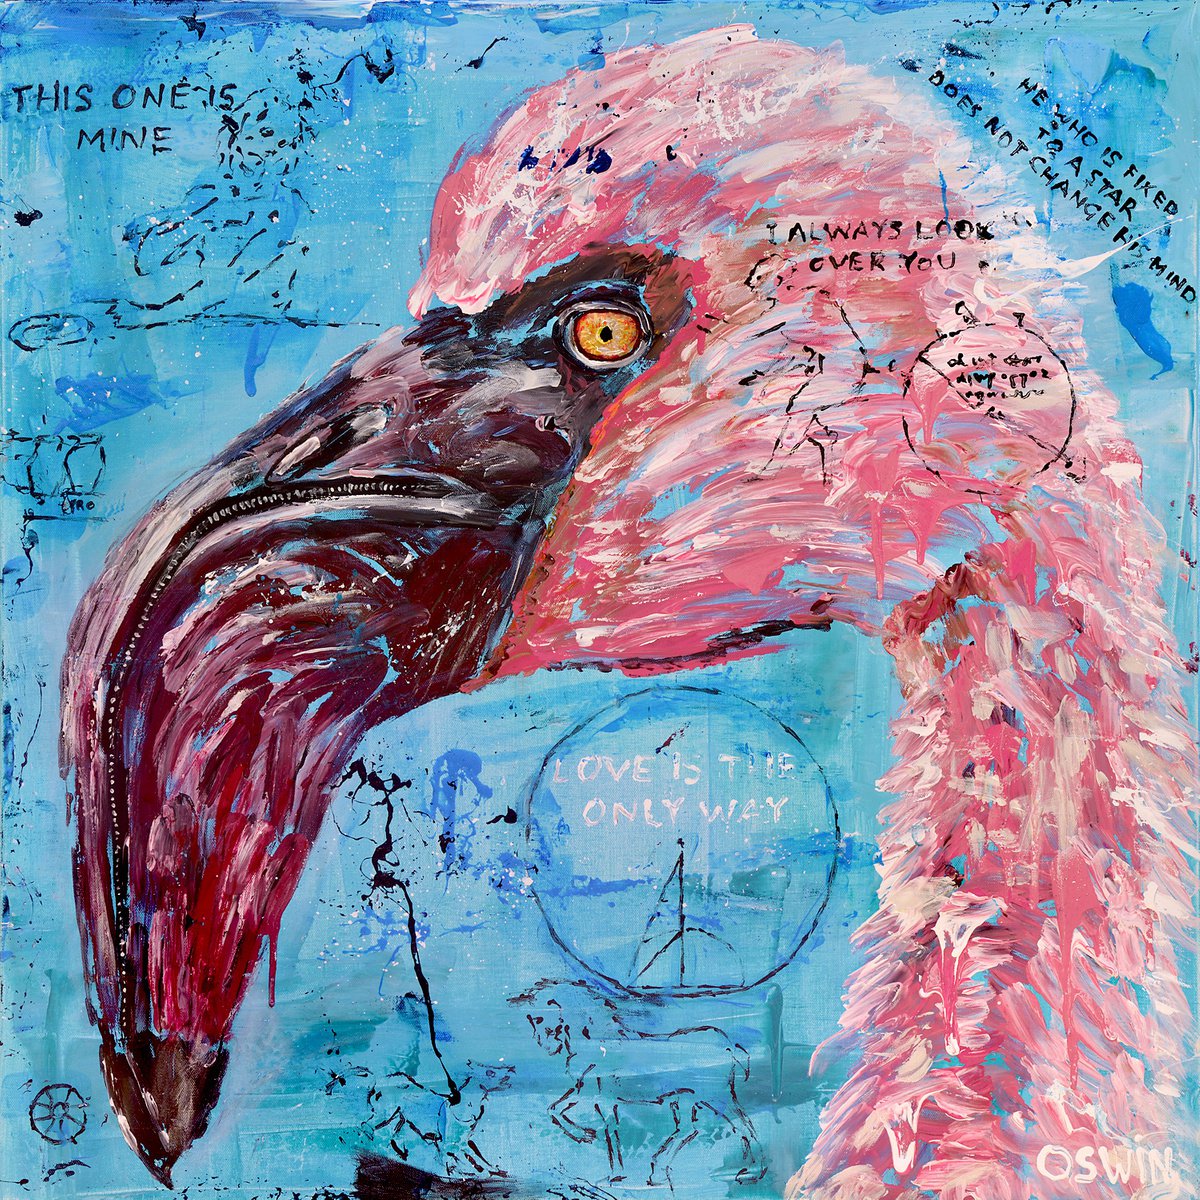 Flamingo bird : LOVE IS THE ONLY WAY - 80 x 80 cm | 31.5x31.5 Series Hidden Treasures by... by Oswin Gesselli